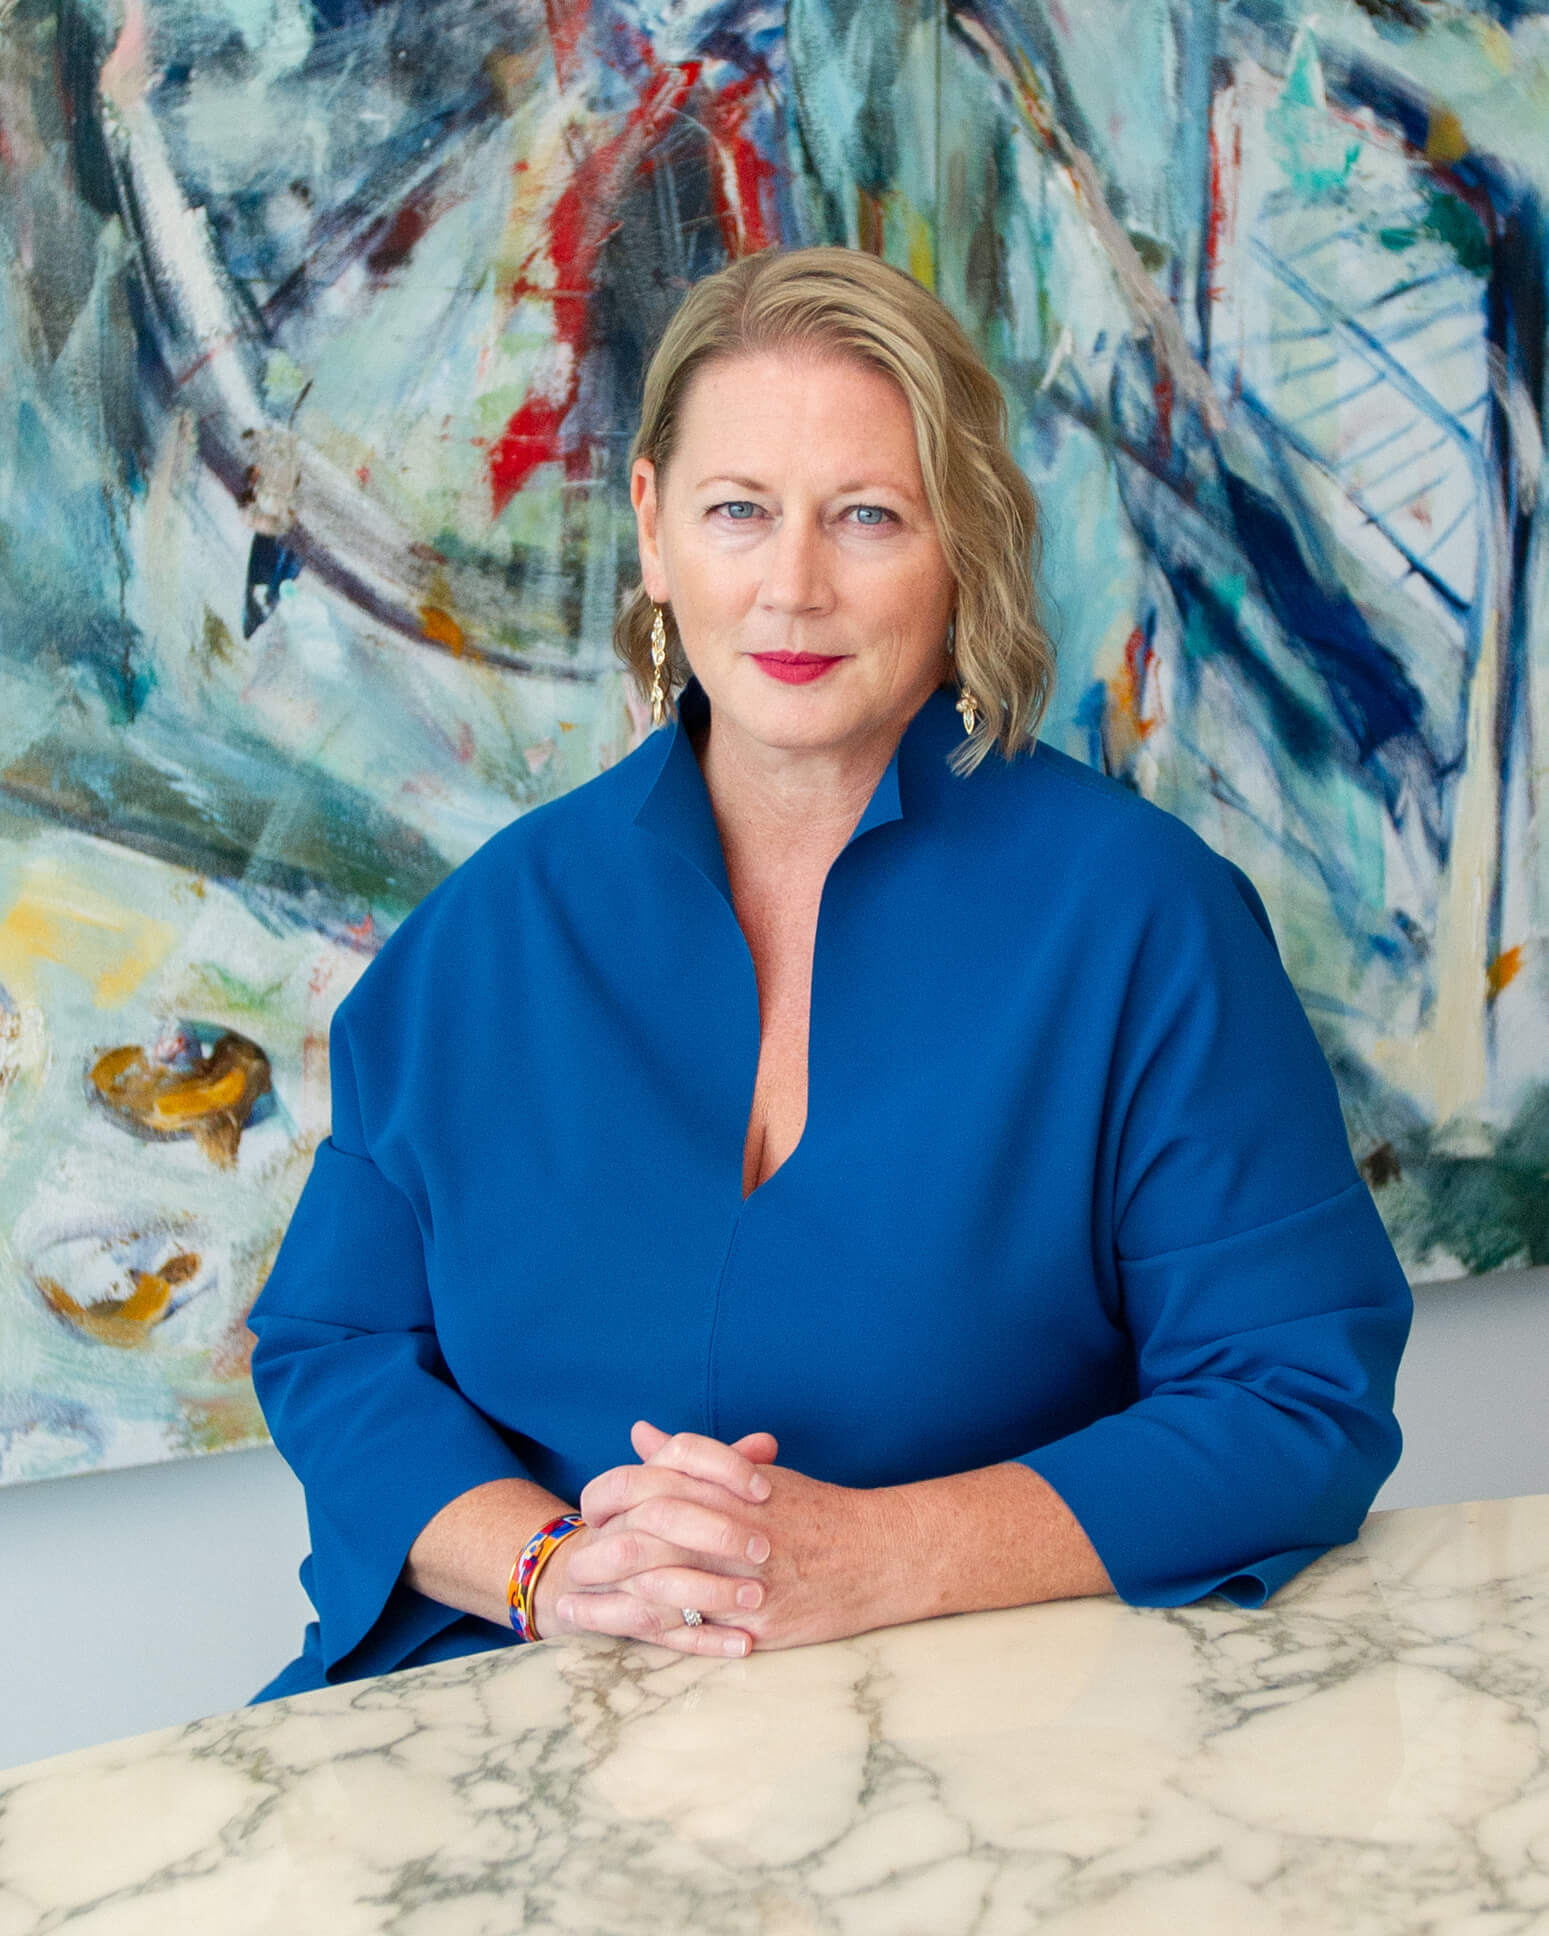 Head shot of CEO Virginia Devlin. She has shoulder length blonde hair, blue eyes and is wearing a blue top, has is sat in front of a brightly patterned wall.